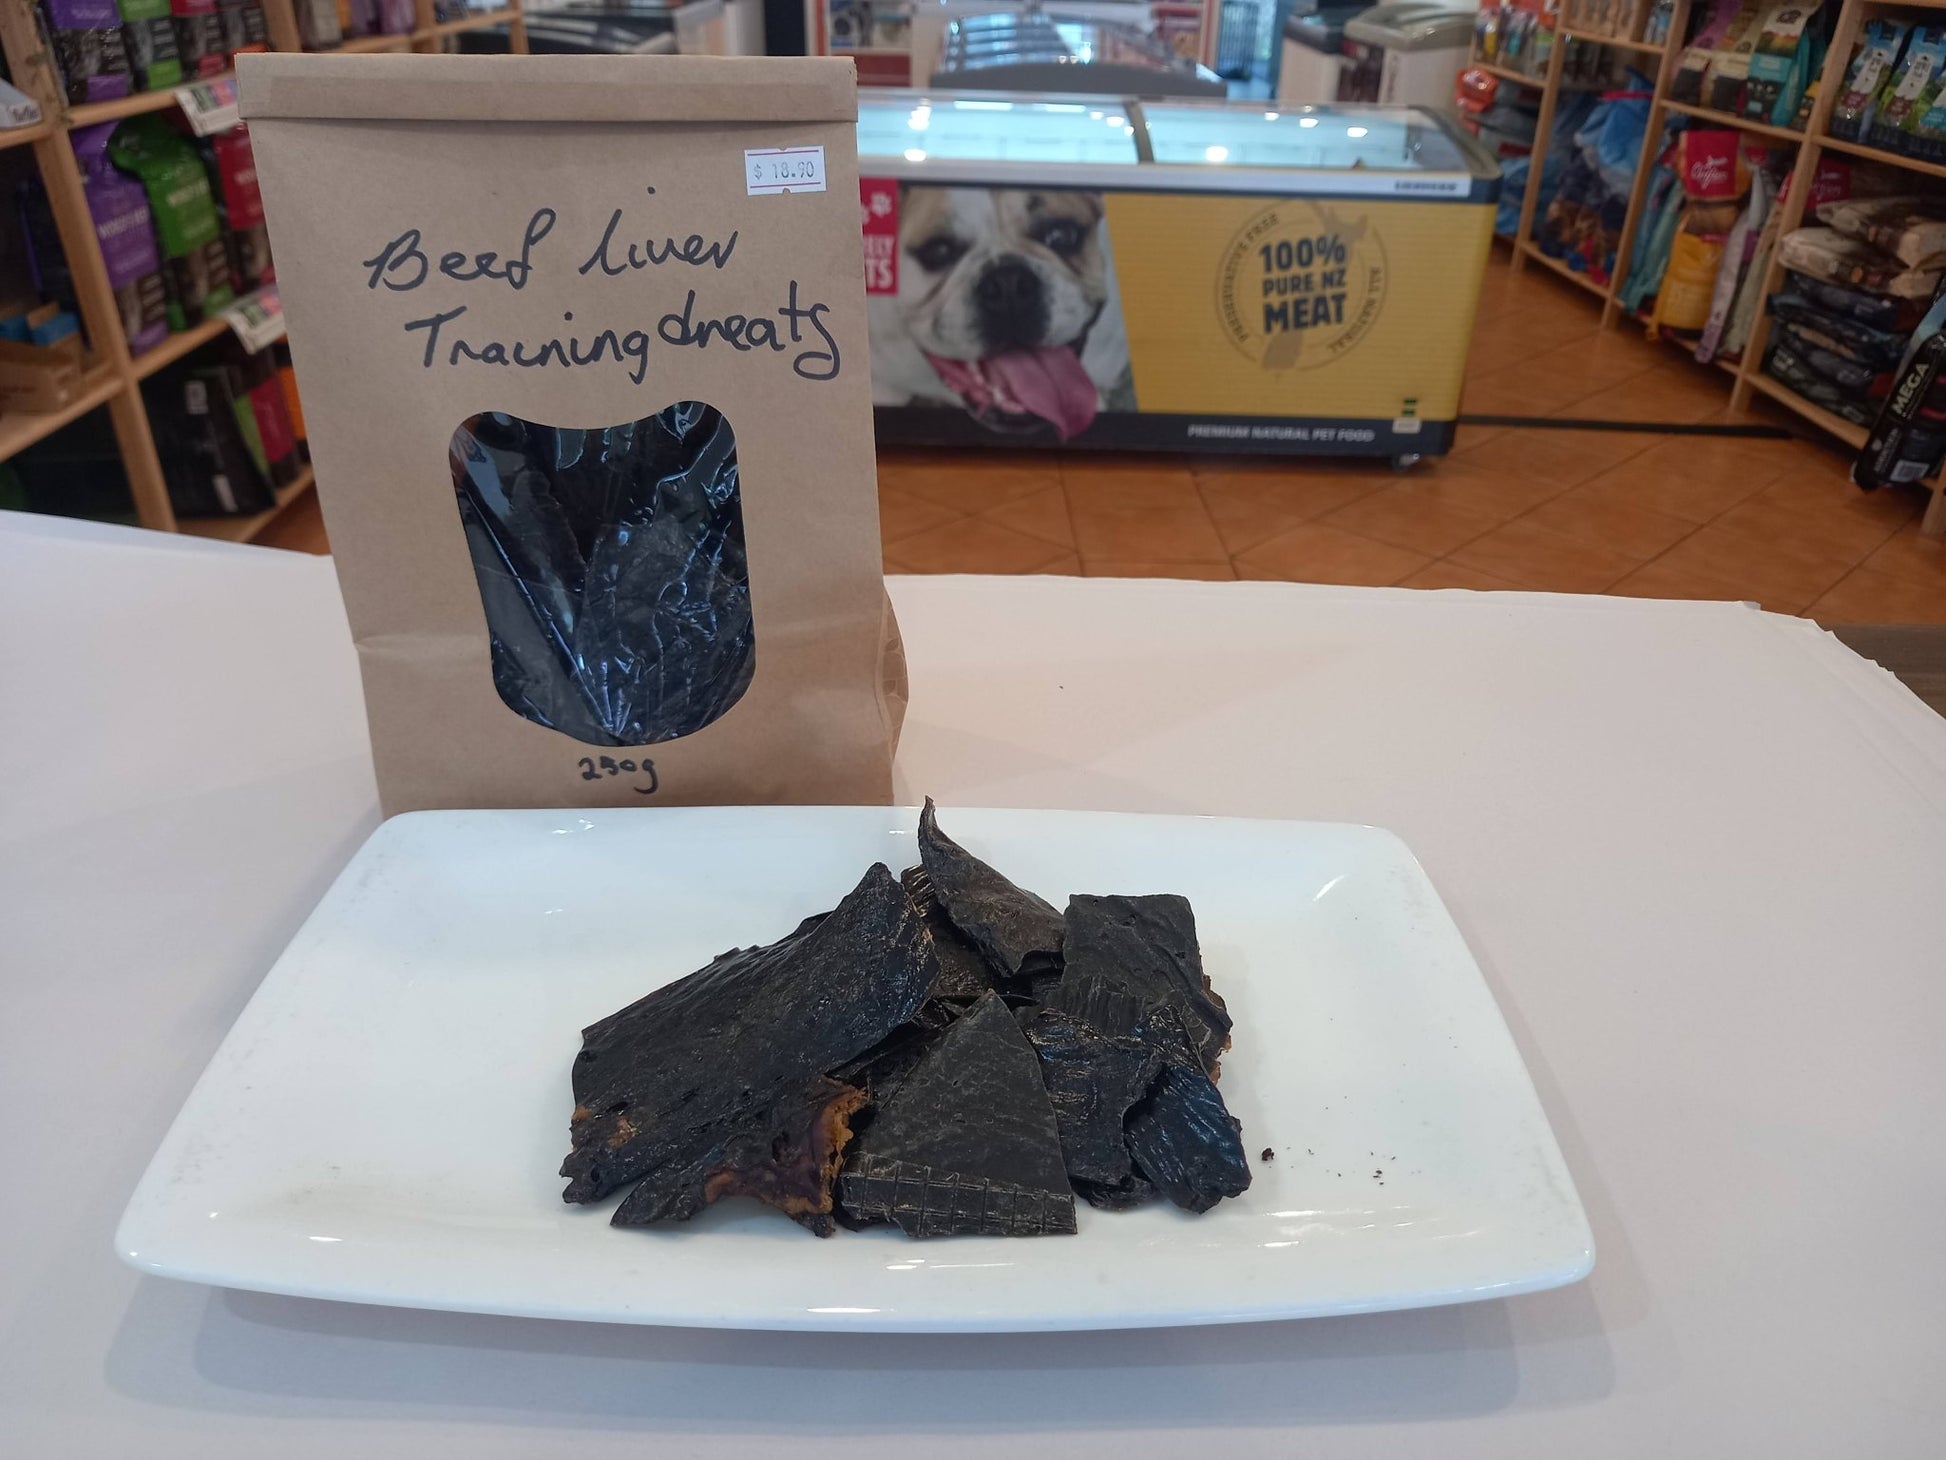 Beef Liver Training Treats - Tuck In Healthy Pet Food & Animal Natural Health Supplies